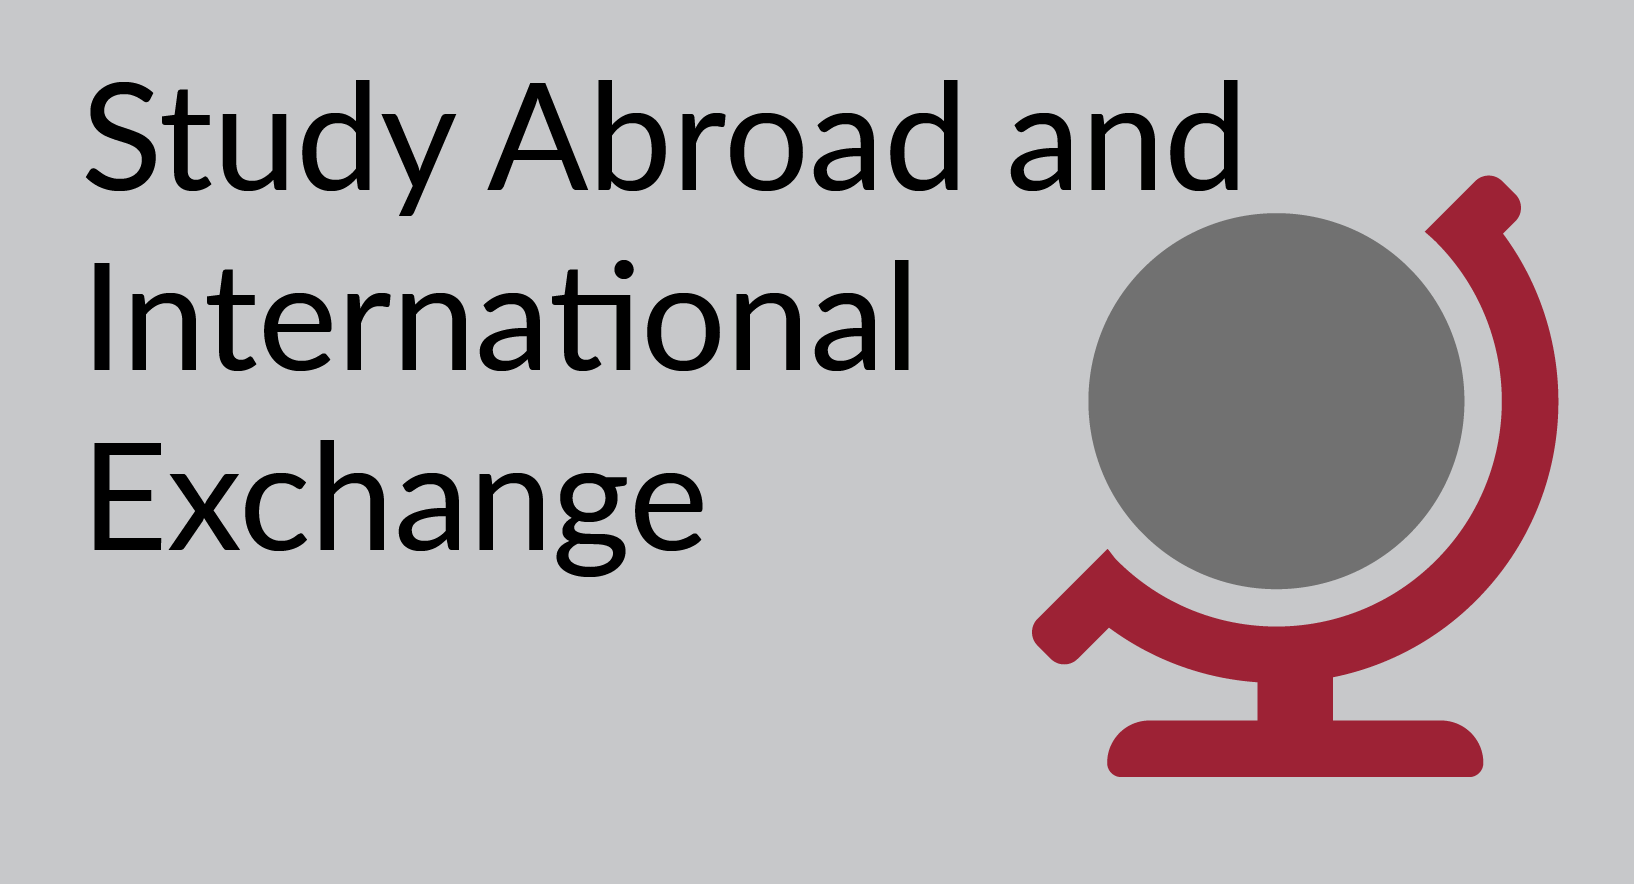 Study Abroad and International Exchange